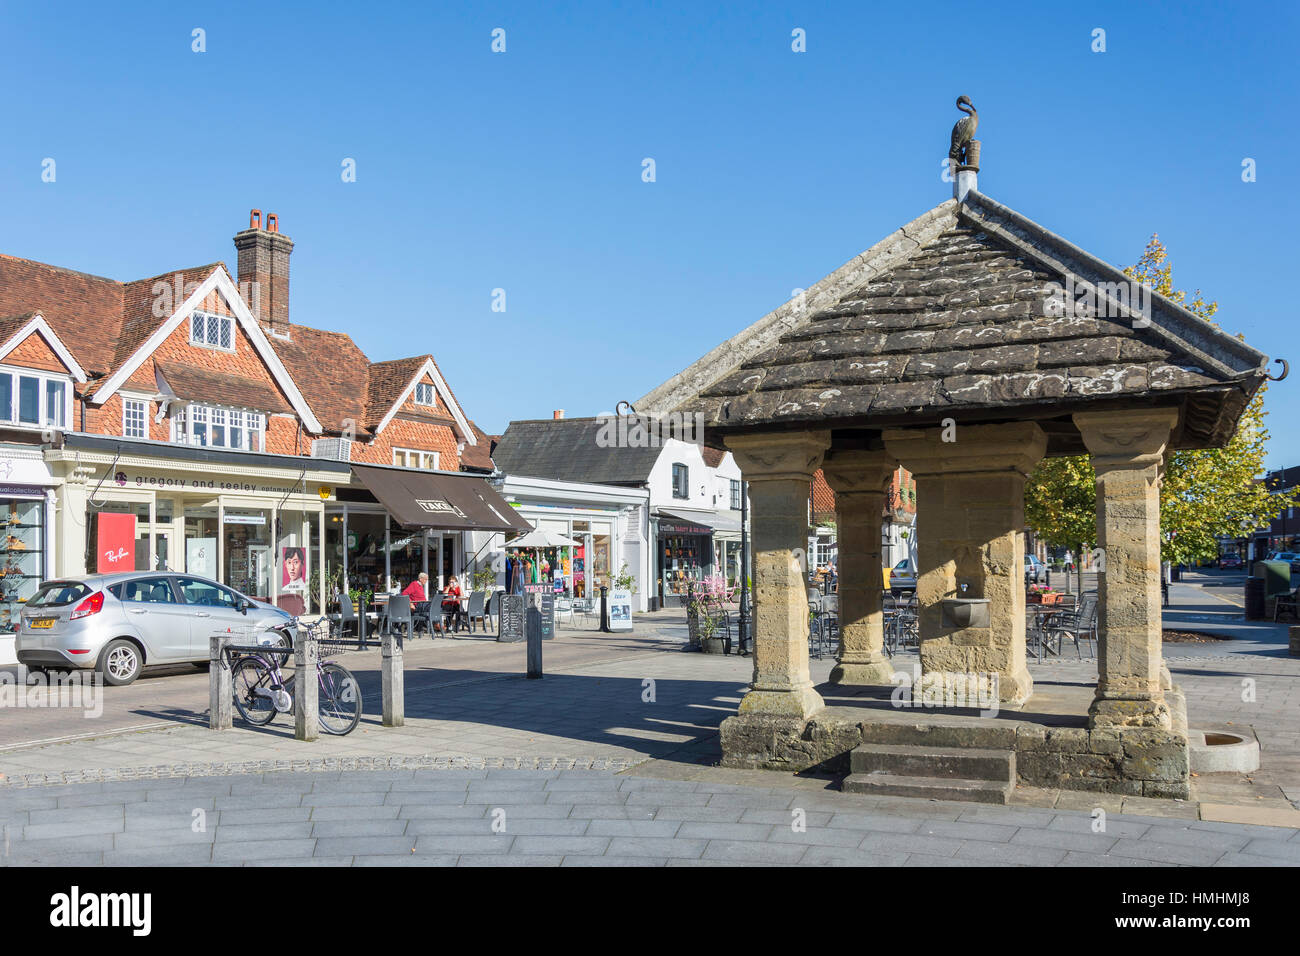 The Water Fountain in Fountain Square, High Street, Cranleigh, Surrey, England, United Kingdom Stock Photo